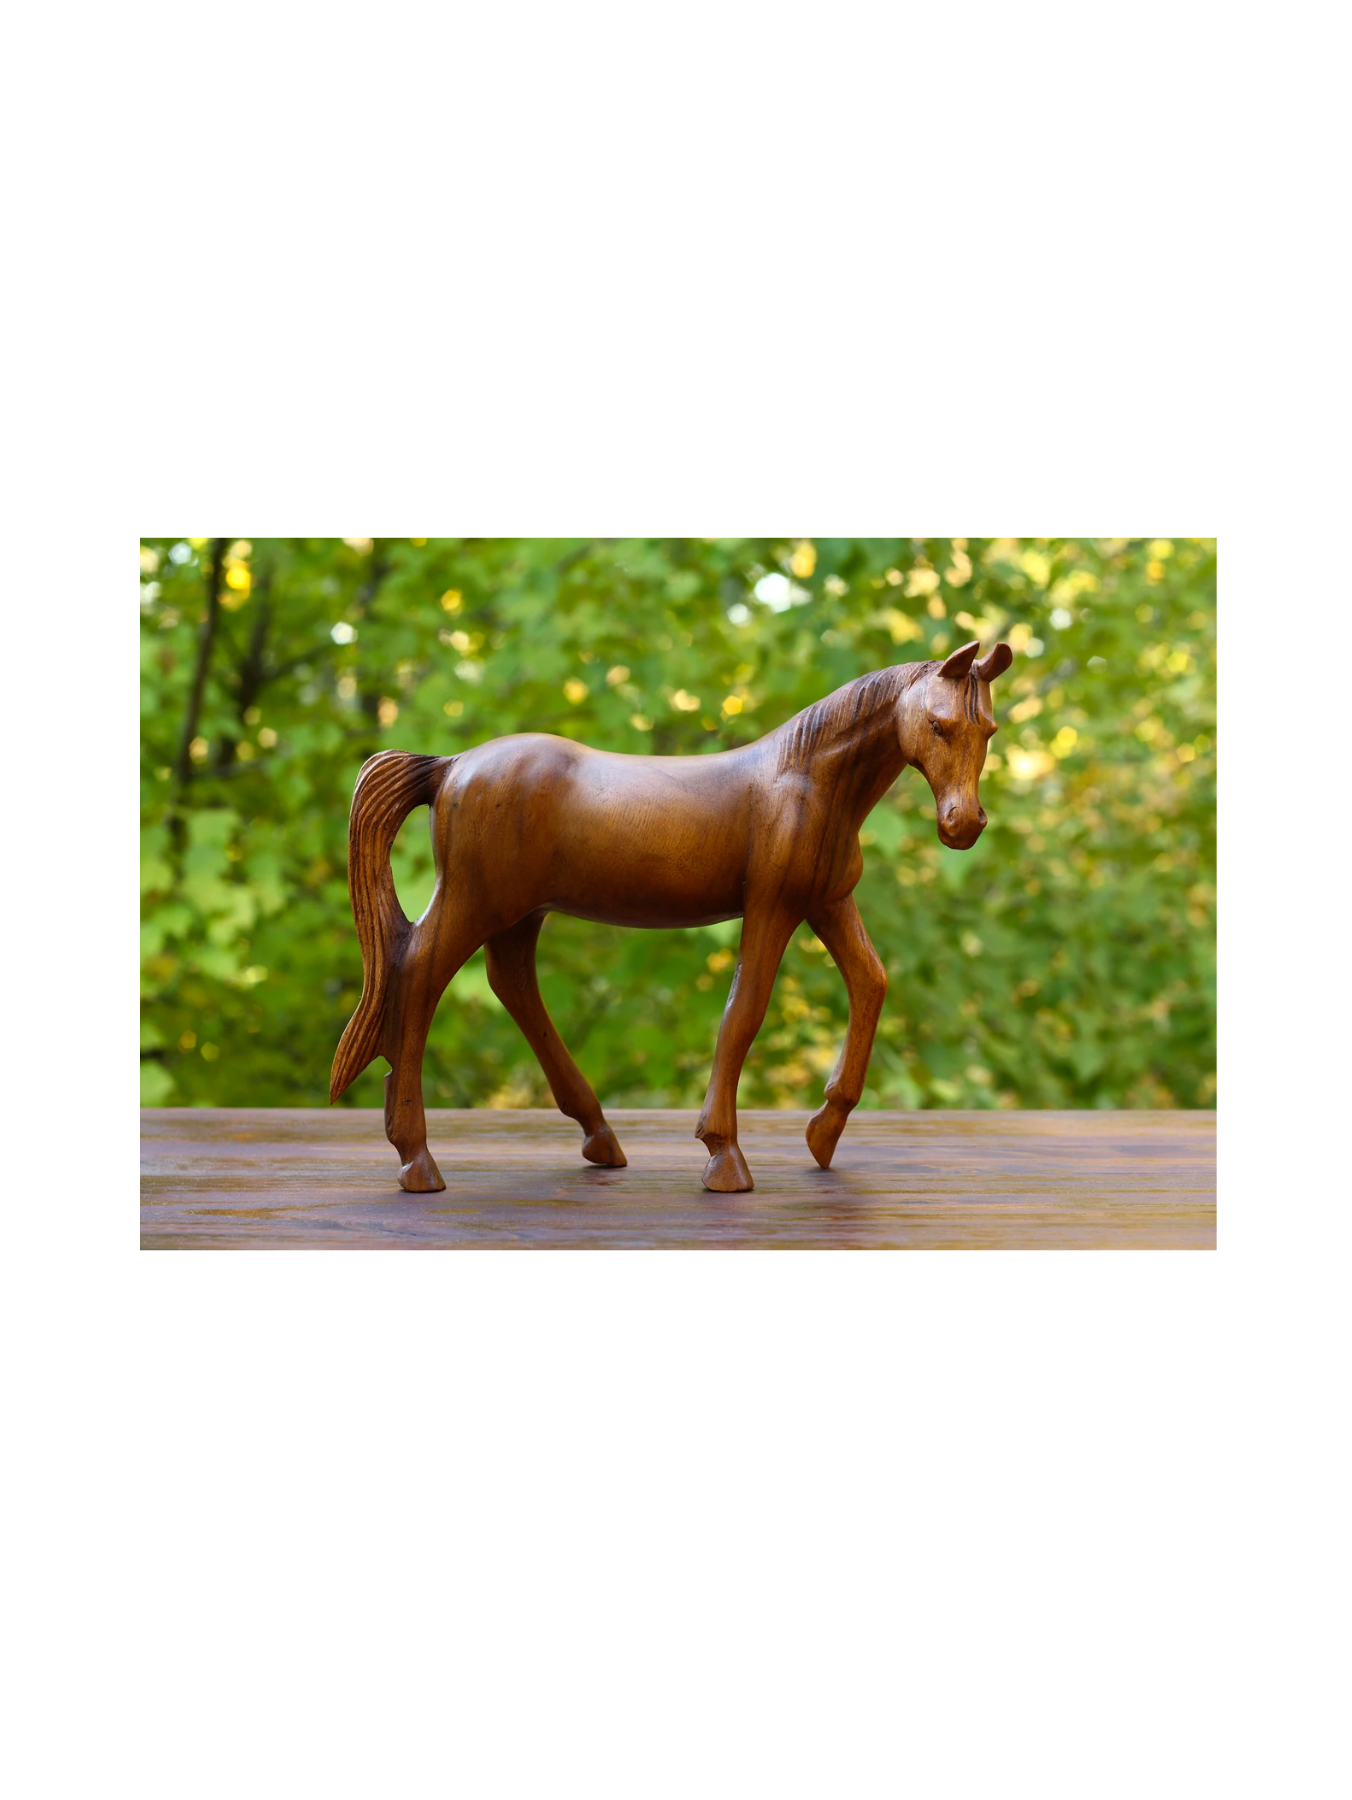 12" Large Wooden Hand Carved Walking Horse Art Figurine Statue Sculpture Handcrafted Handmade Home Decor Accent Decoration